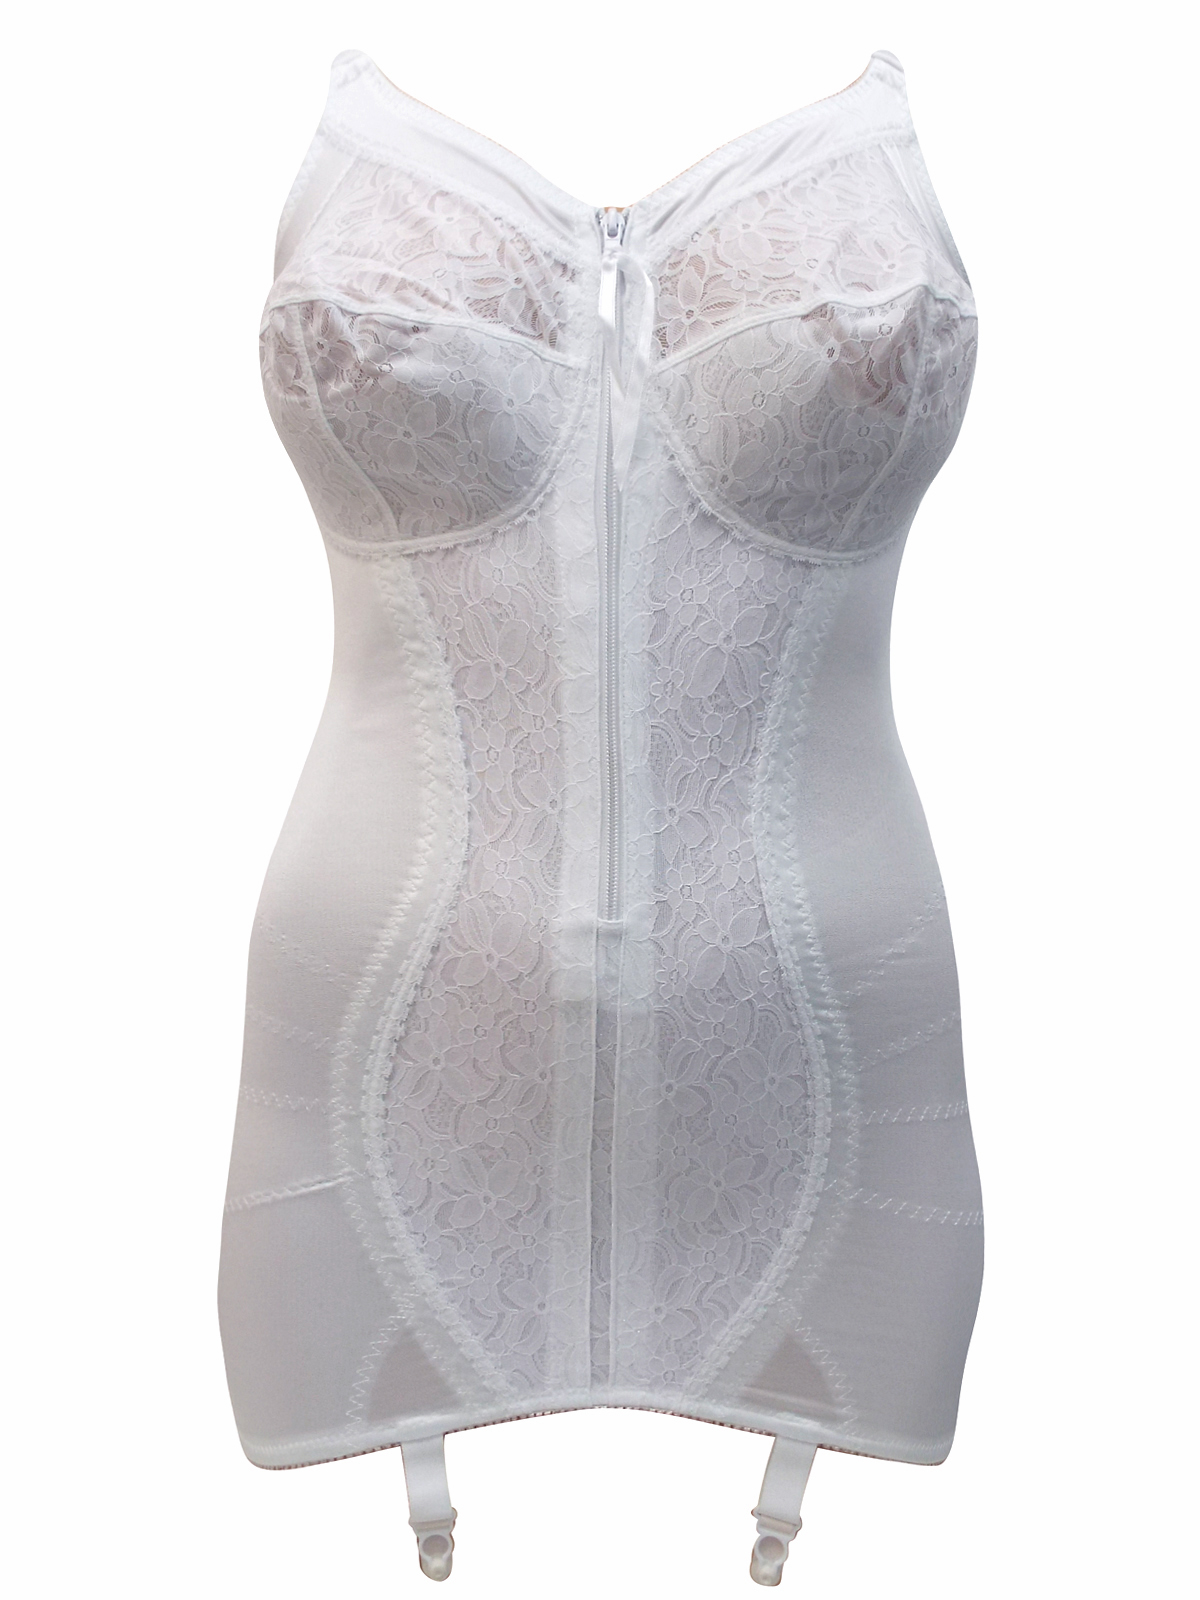 Clothing Shoes And Accessories New Ladies Firm Control Corselette All In One By Naturana White 36